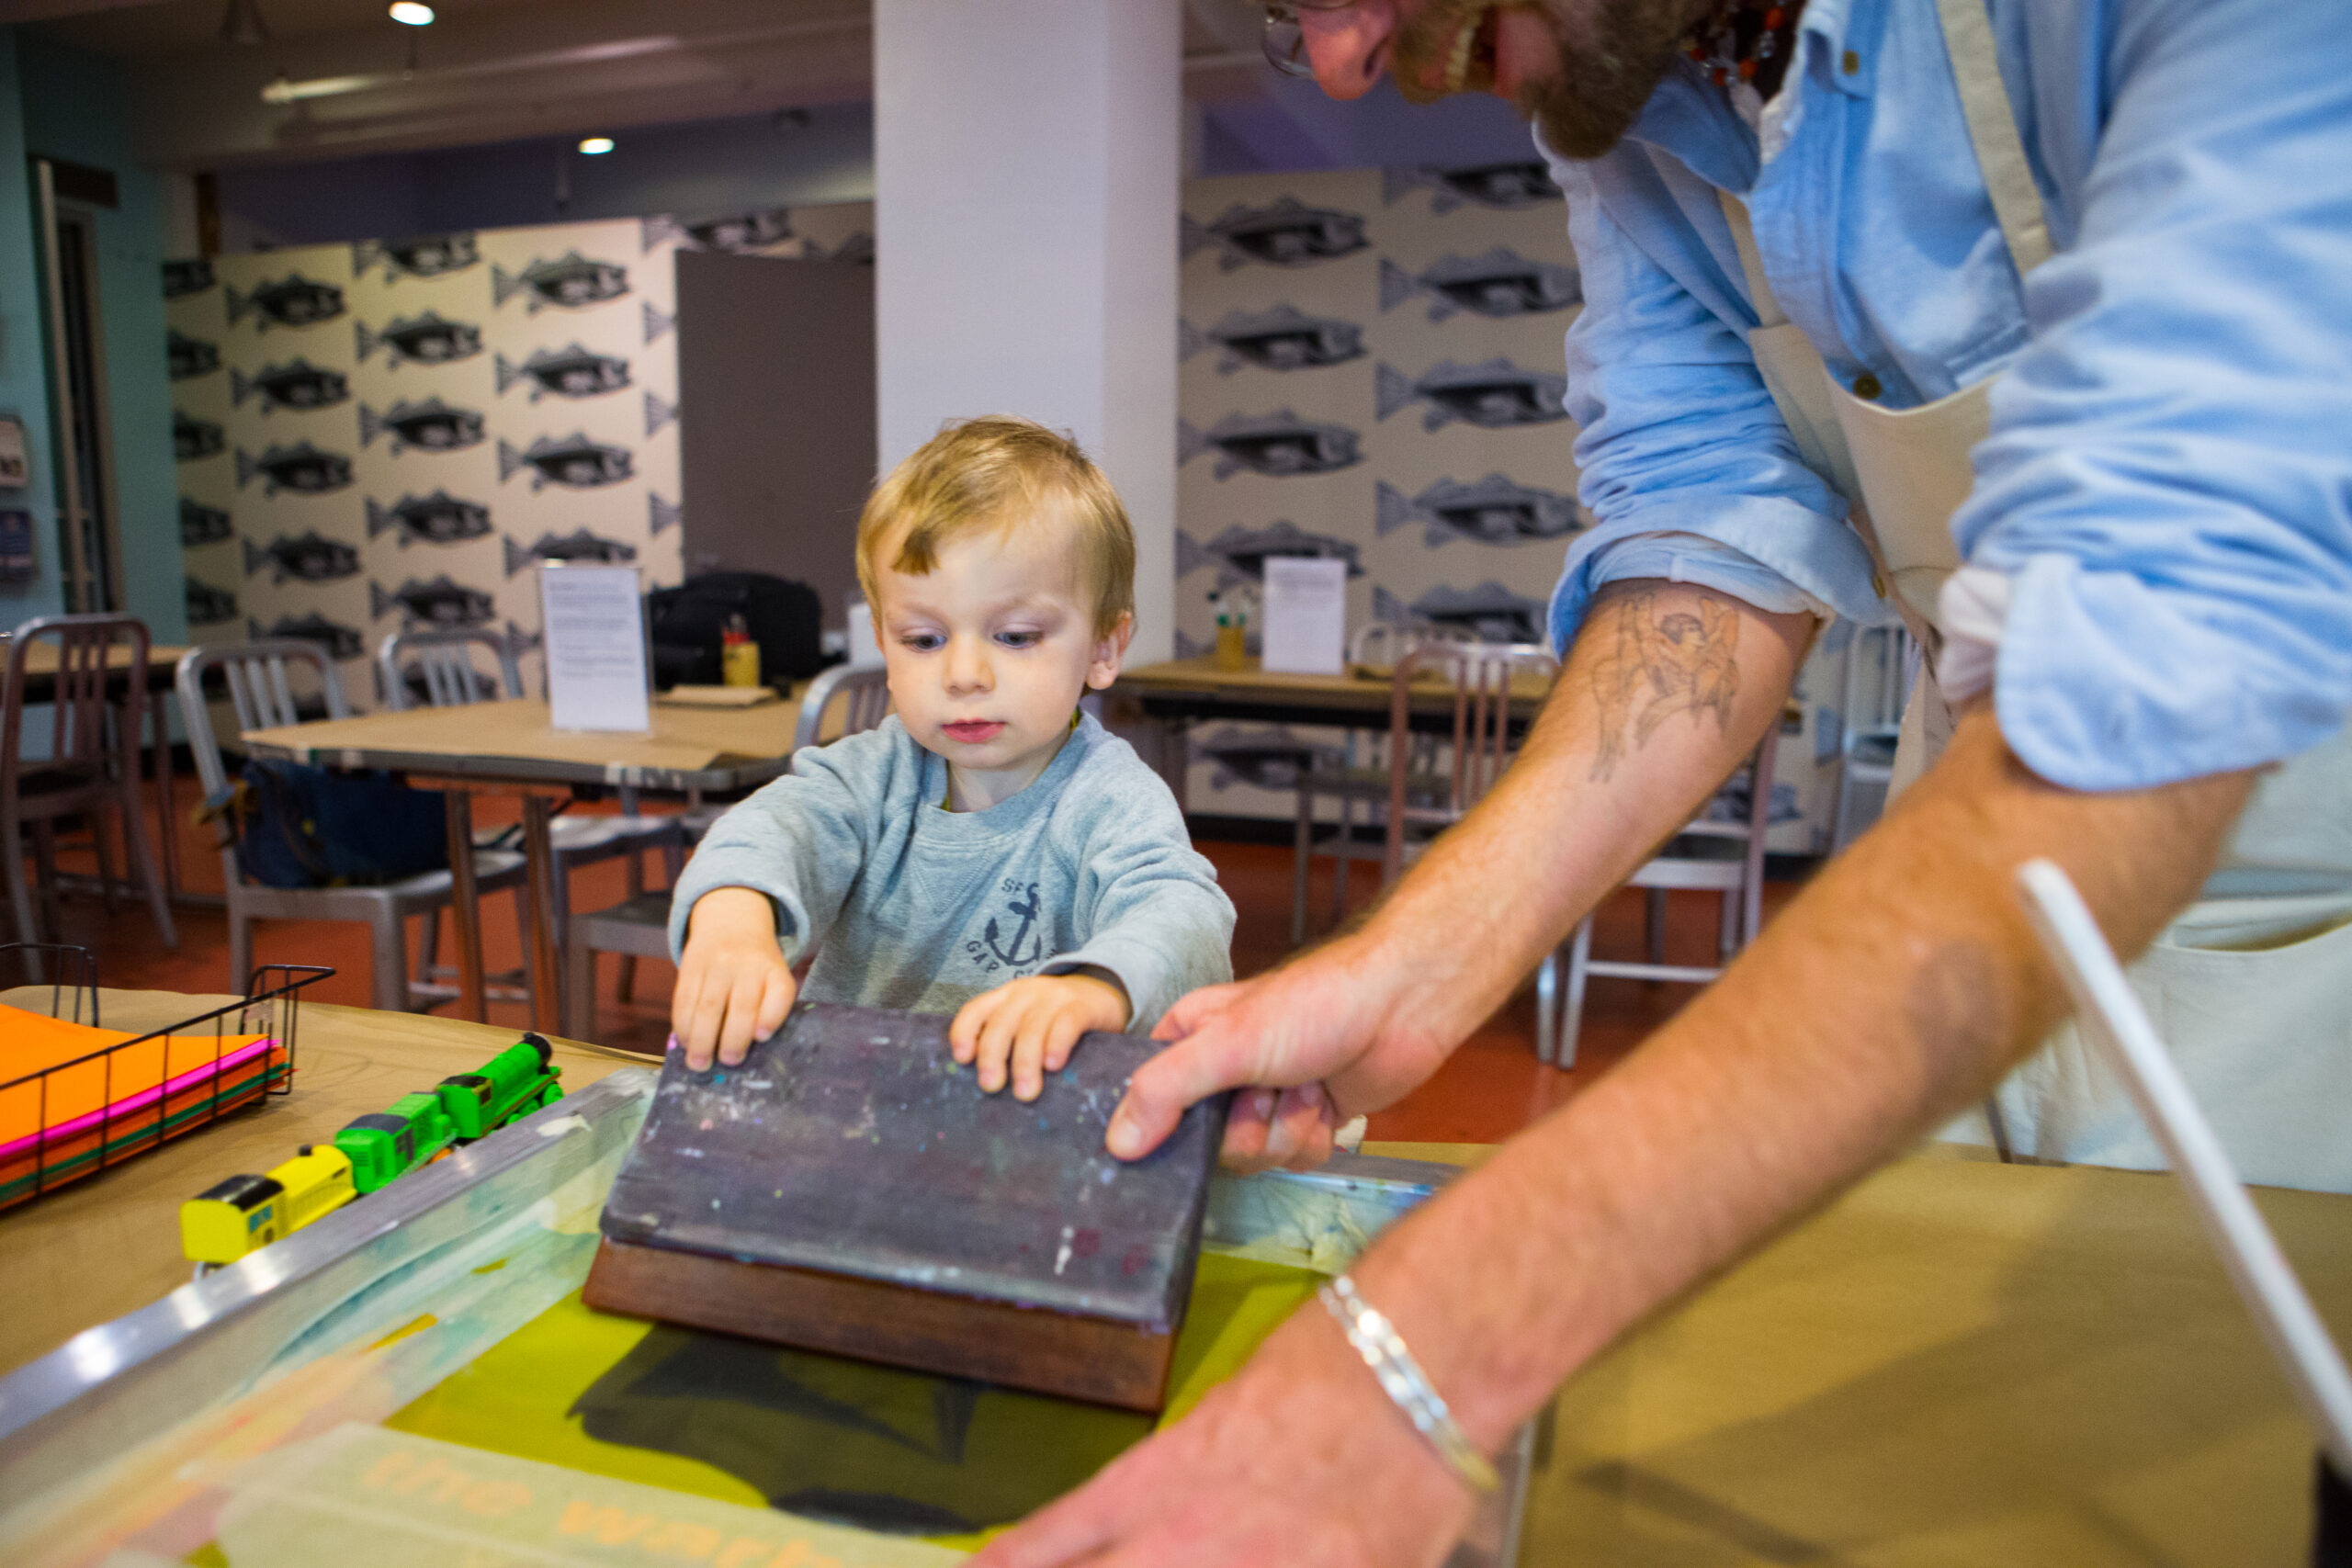 An artist educator wearing a blue button-down shirt with his sleeves rolled to his elbows and a beige apron helps a toddler with blonde hair make a screen print in the Andy Warhol Museum's Factory studio.